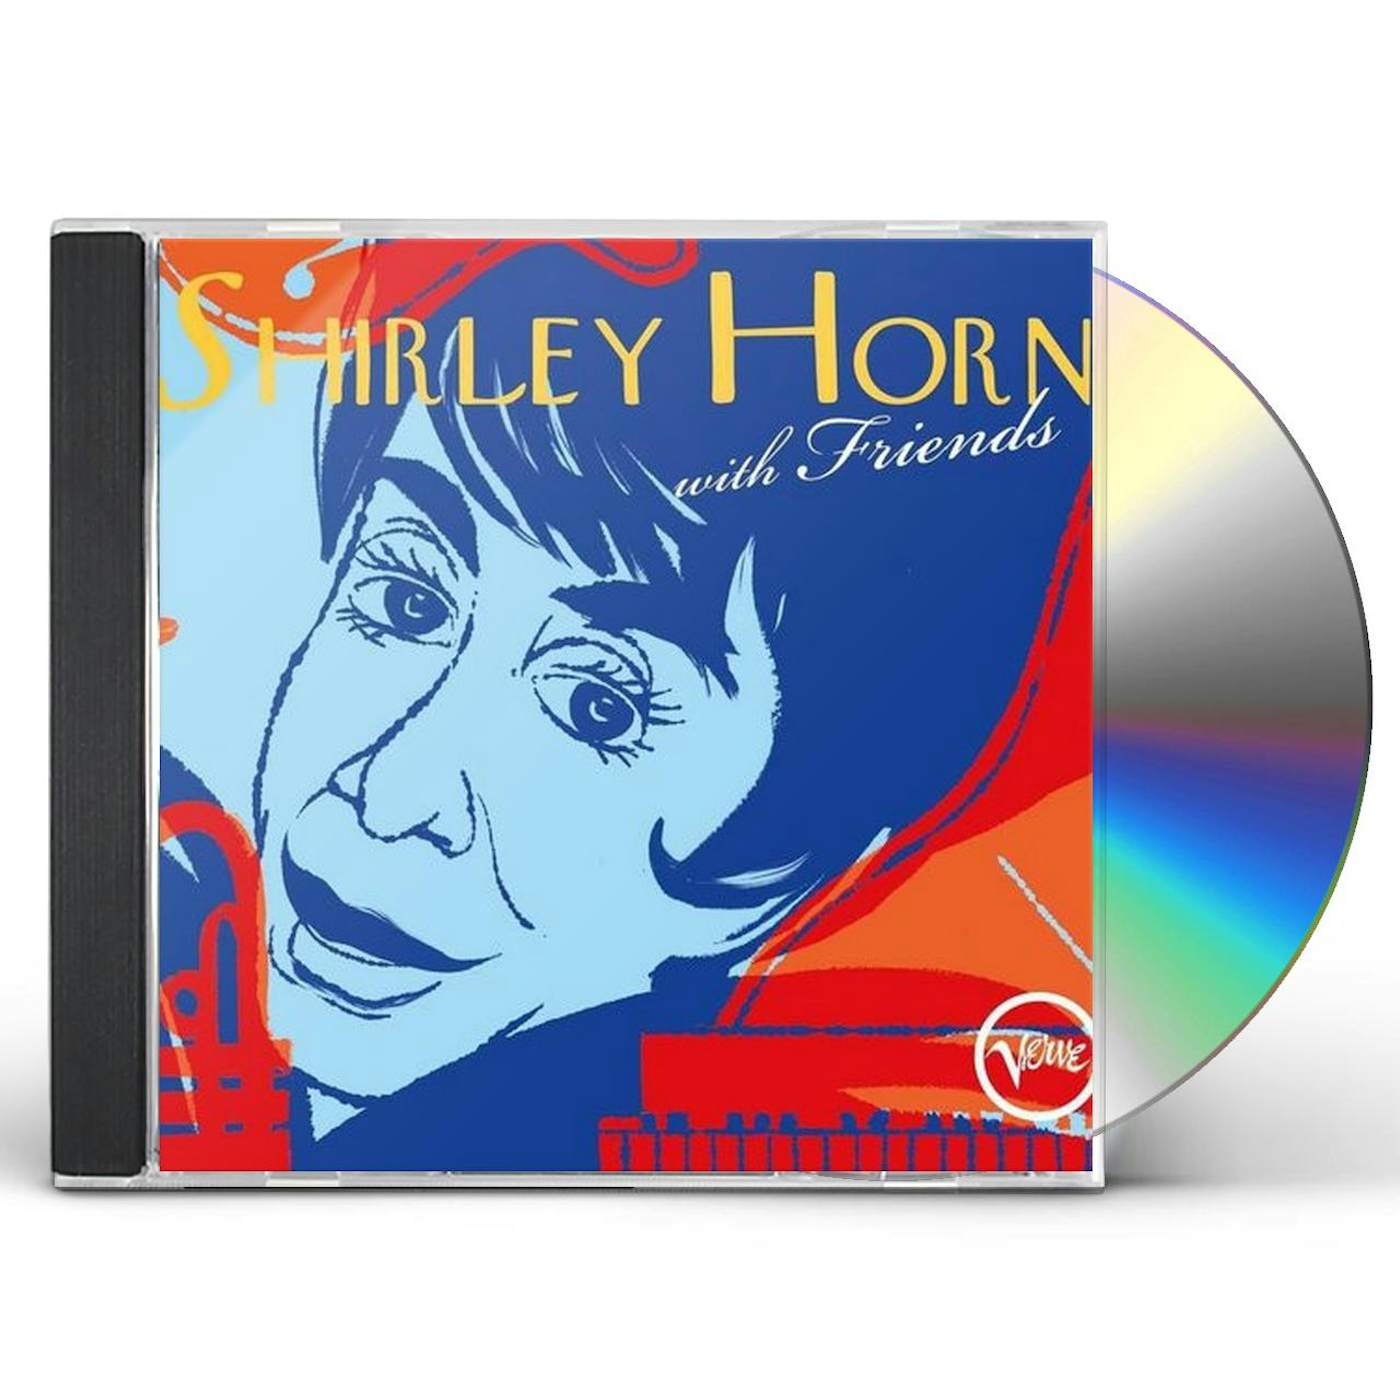 SHIRLEY HORN WITH FRIENDS (2 CD) CD